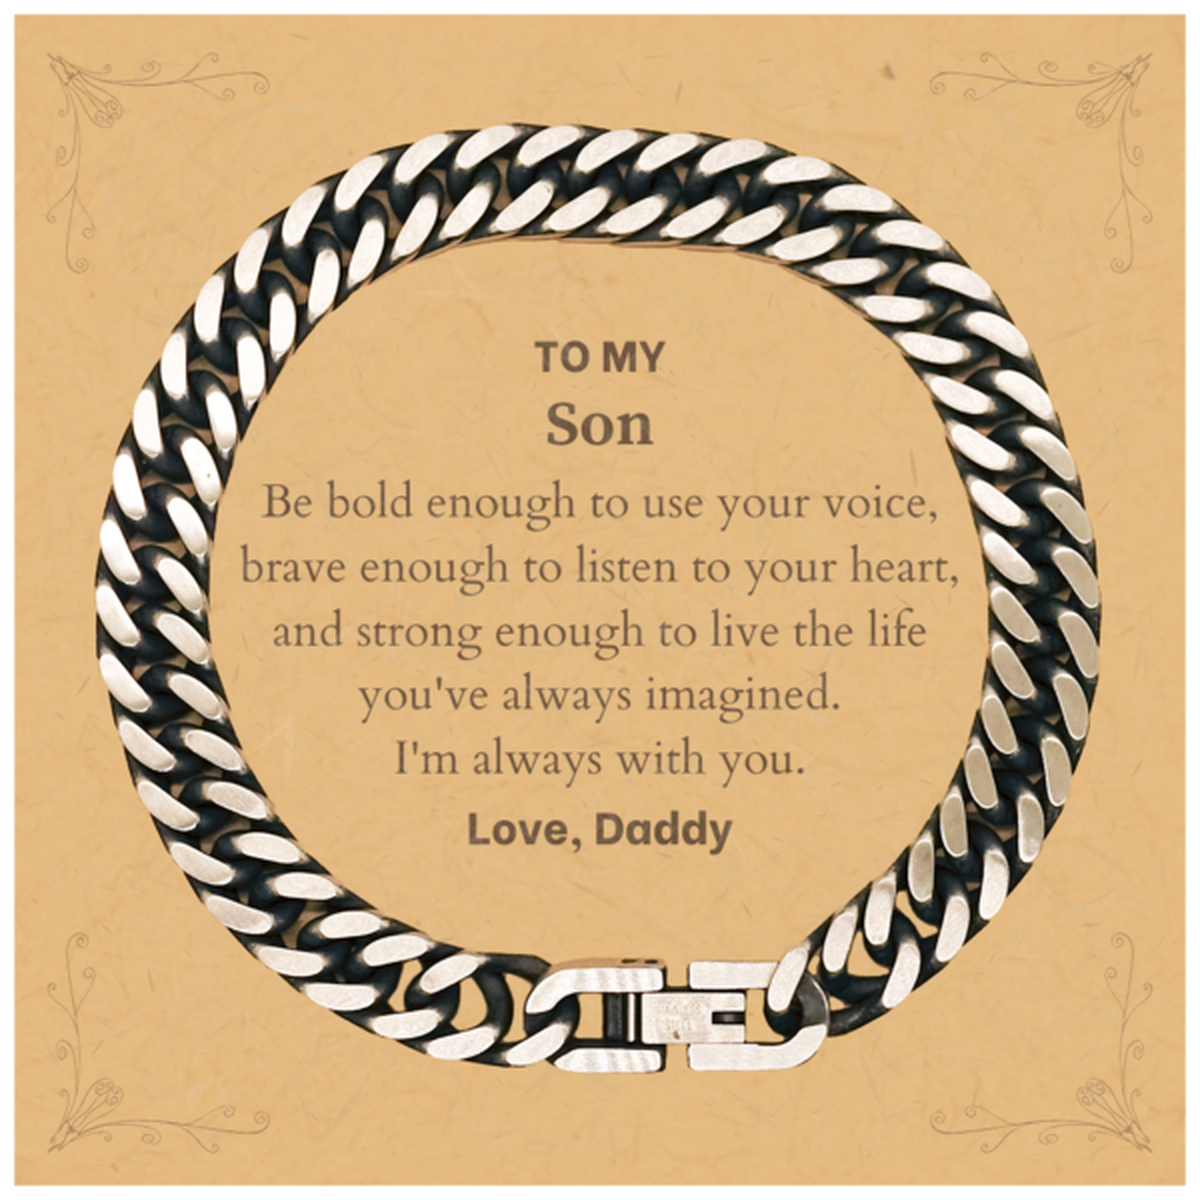 Keepsake Son Cuban Link Chain Bracelet Gift Idea Graduation Christmas Birthday Son from Daddy, Son Be bold enough to use your voice, brave enough to listen to your heart. Love, Daddy